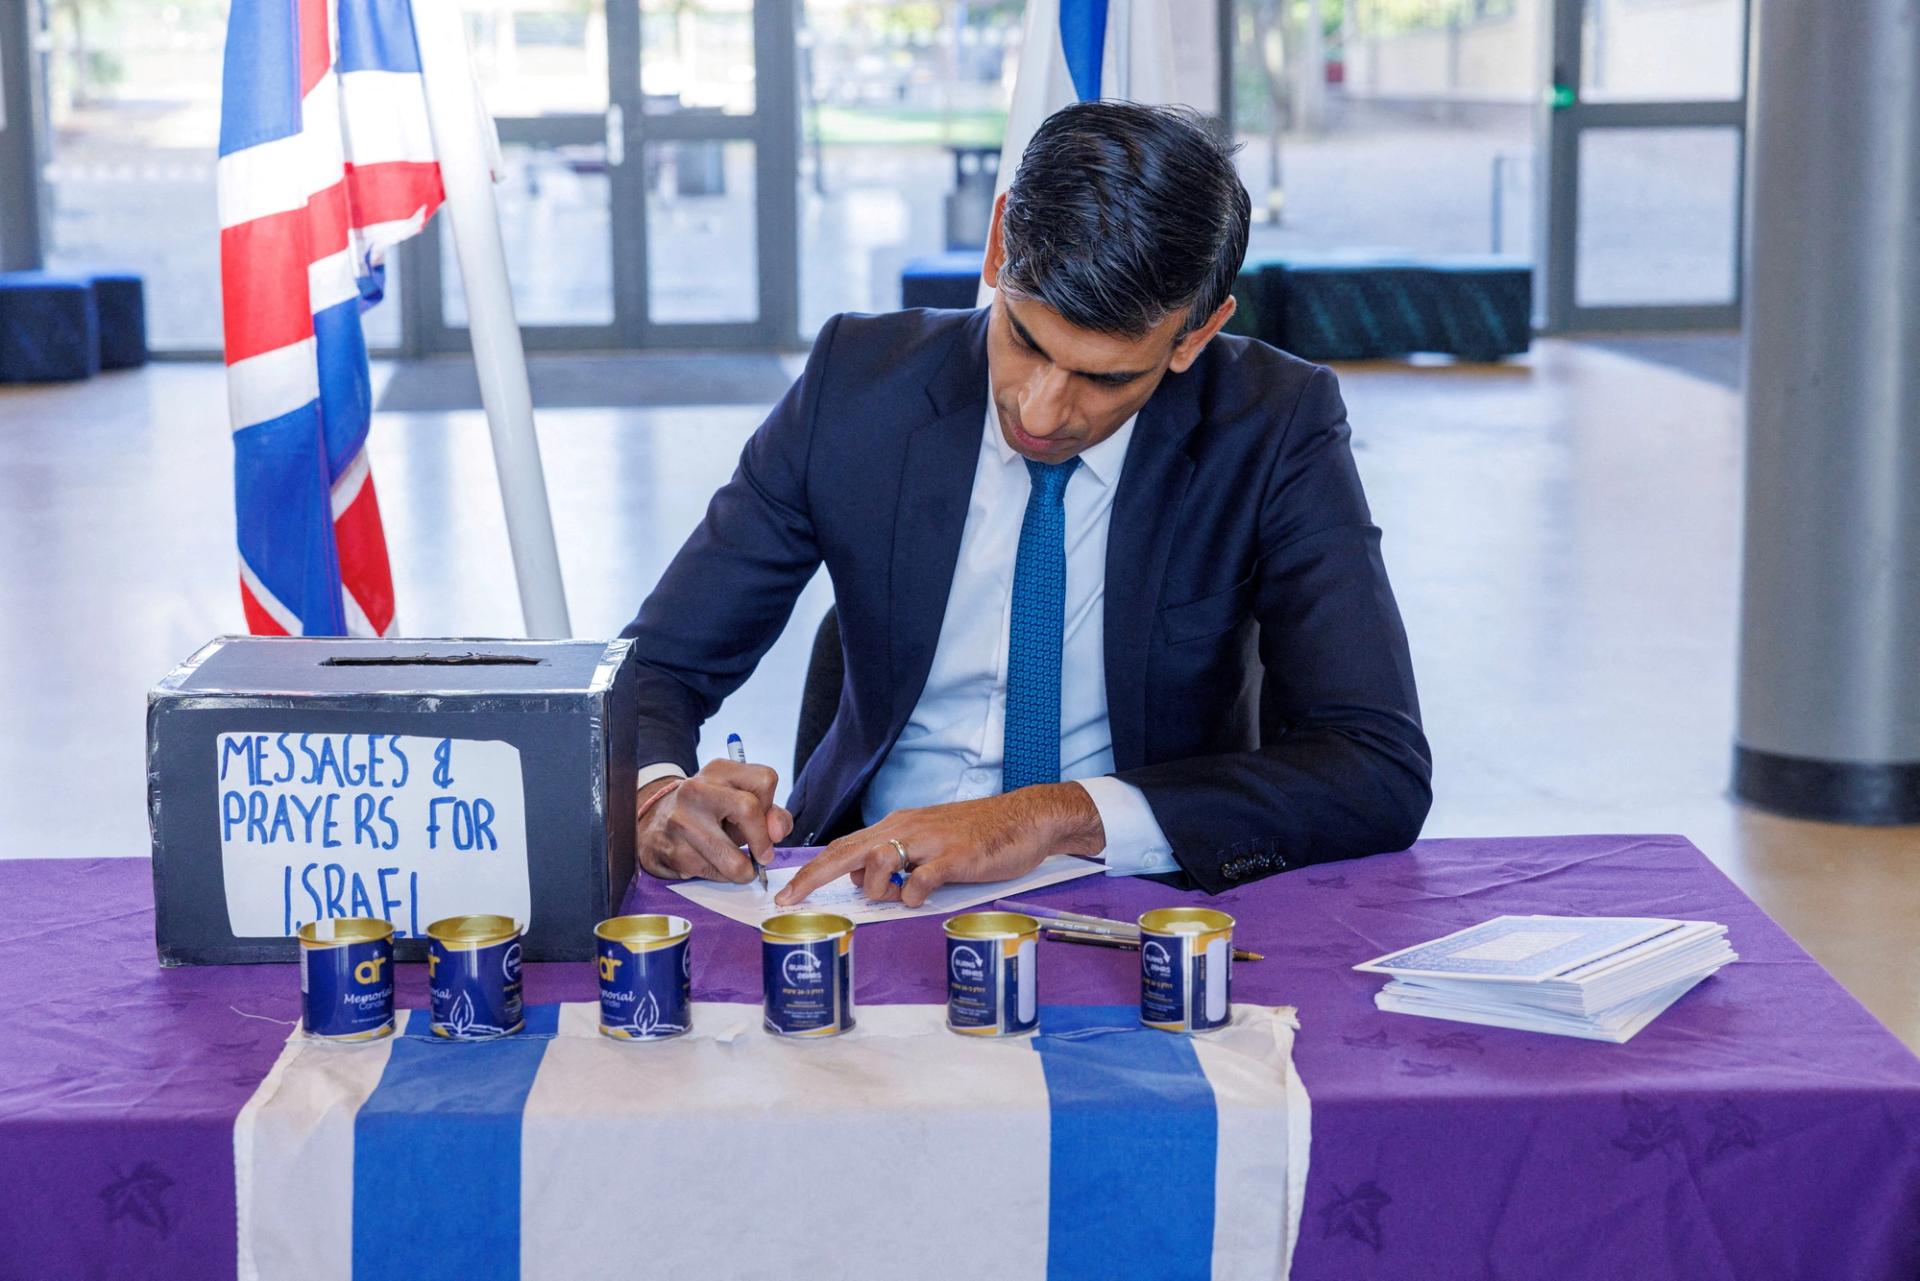 British Prime Minister Rishi Sunak signs messages and prayers for Israel at a Jewish school in London, Britain October 16, 2023. 